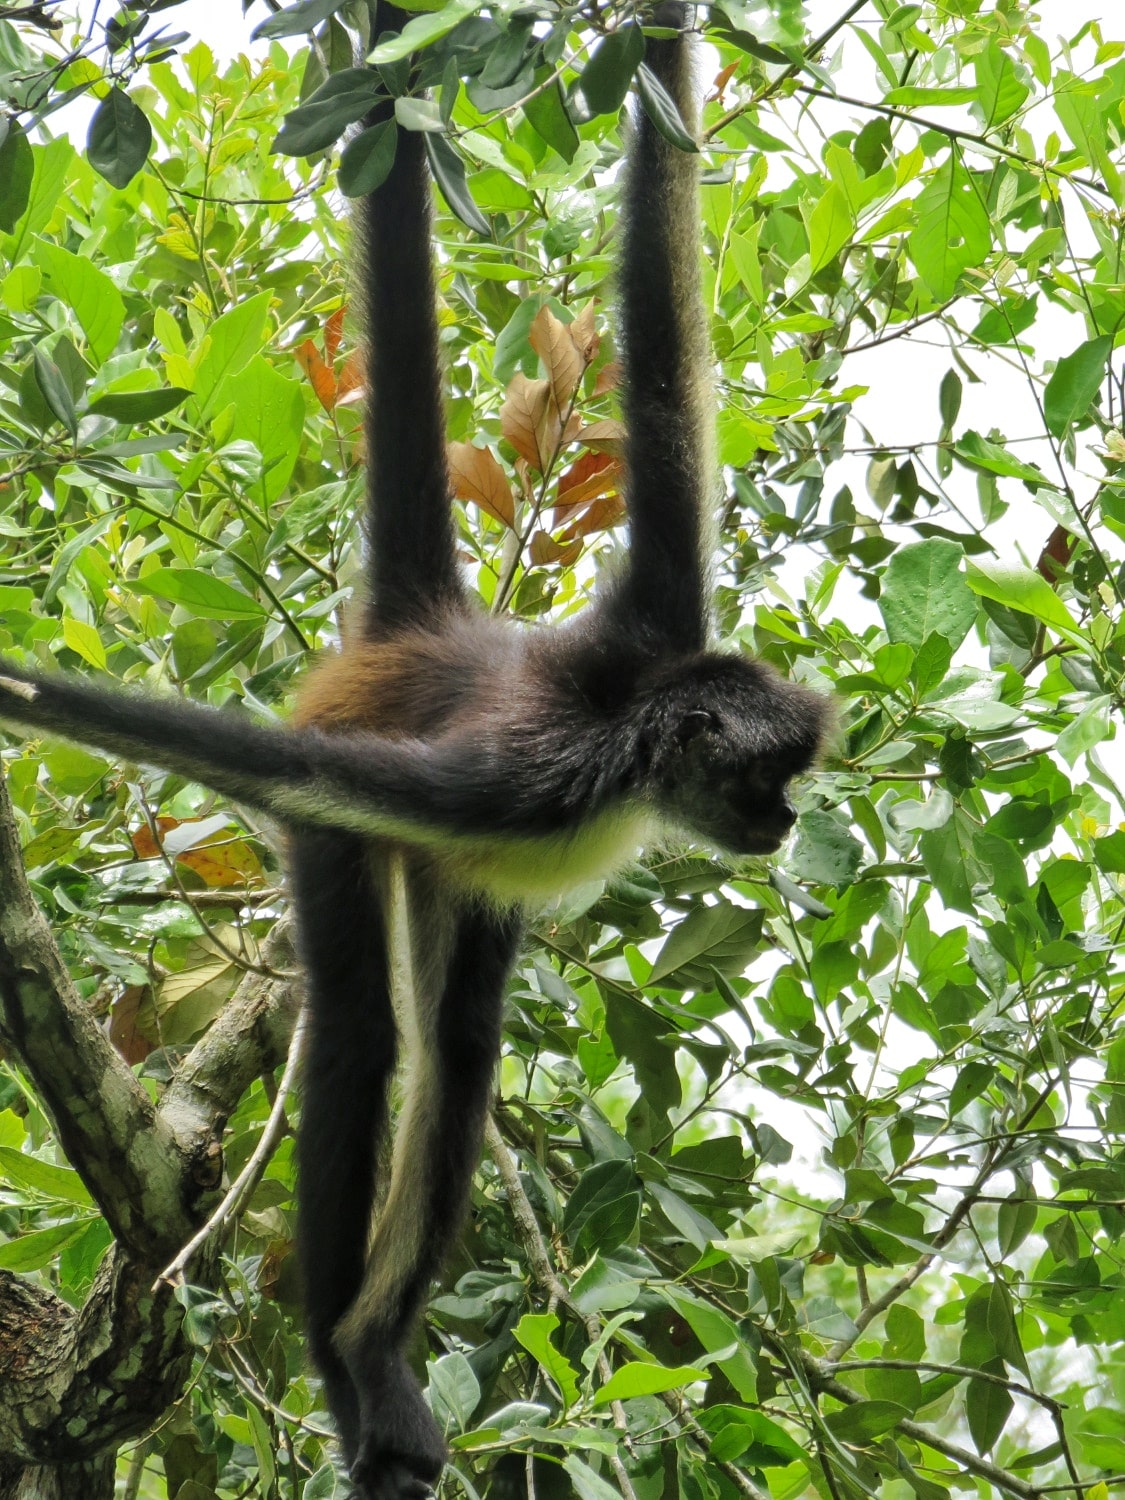 Spider monkey at the Belize zoo